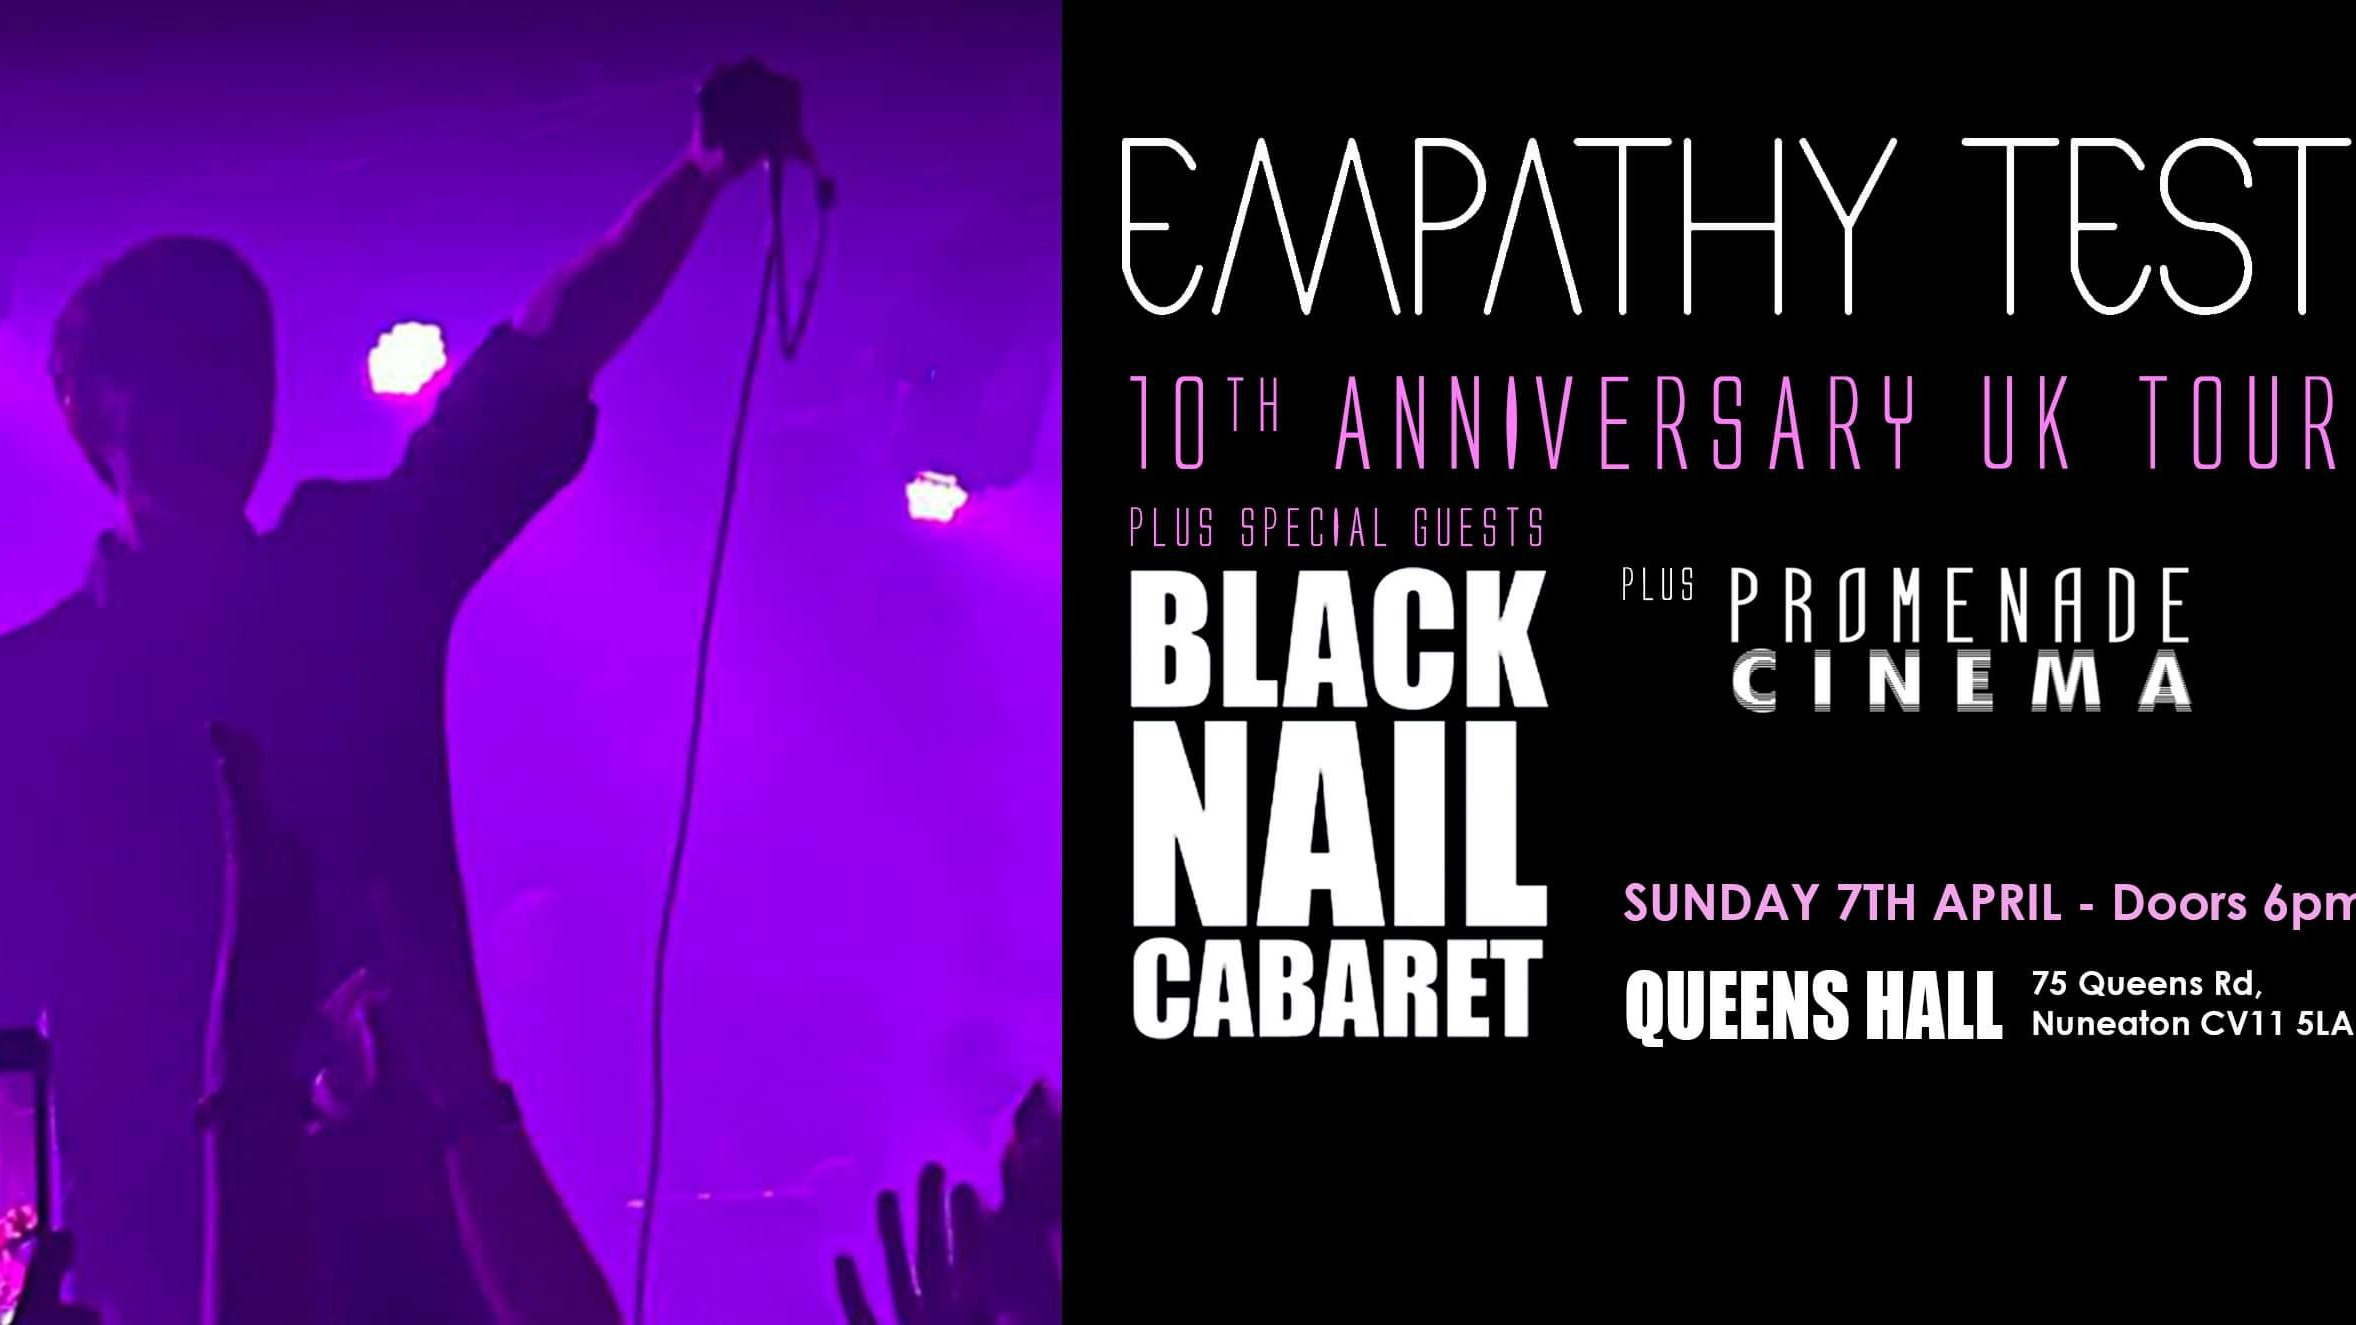 EMPATHY TEST 10th ANNIVERSARY UK TOUR with Special Guests BLACK NAIL CABARET & Promenade Cinema